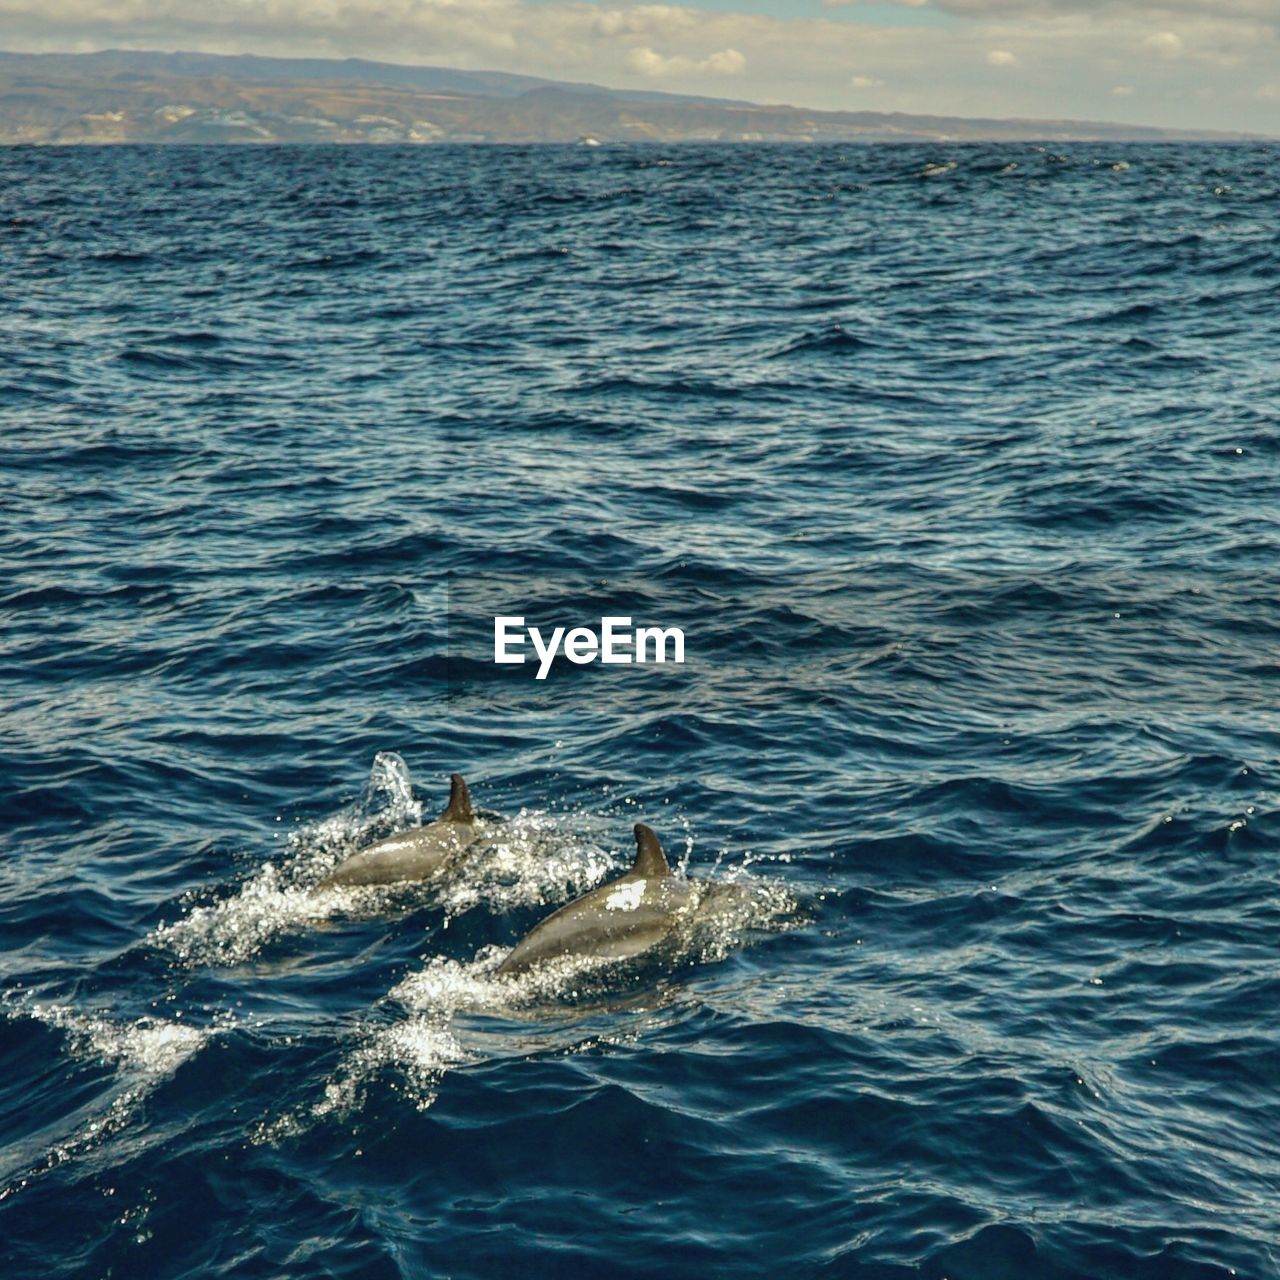 Dolphins swimming in sea against sky. gran canaria. stupid algorithm suggests spain,usa